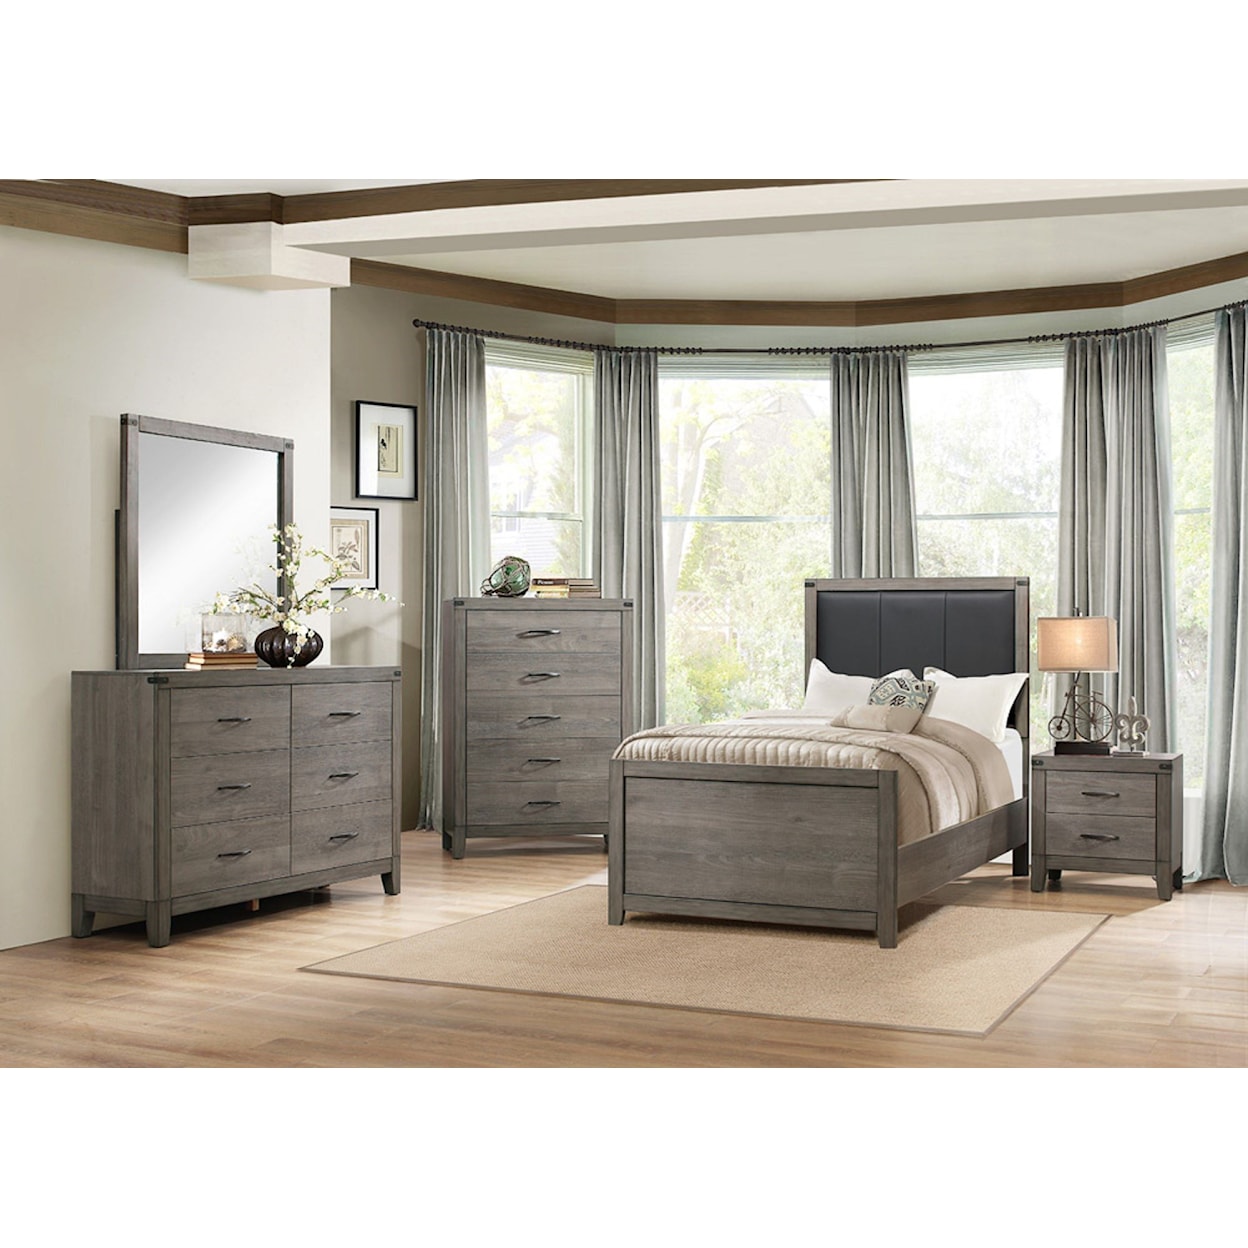 Homelegance Furniture 2042 Contemporary Twin Bedroom Group